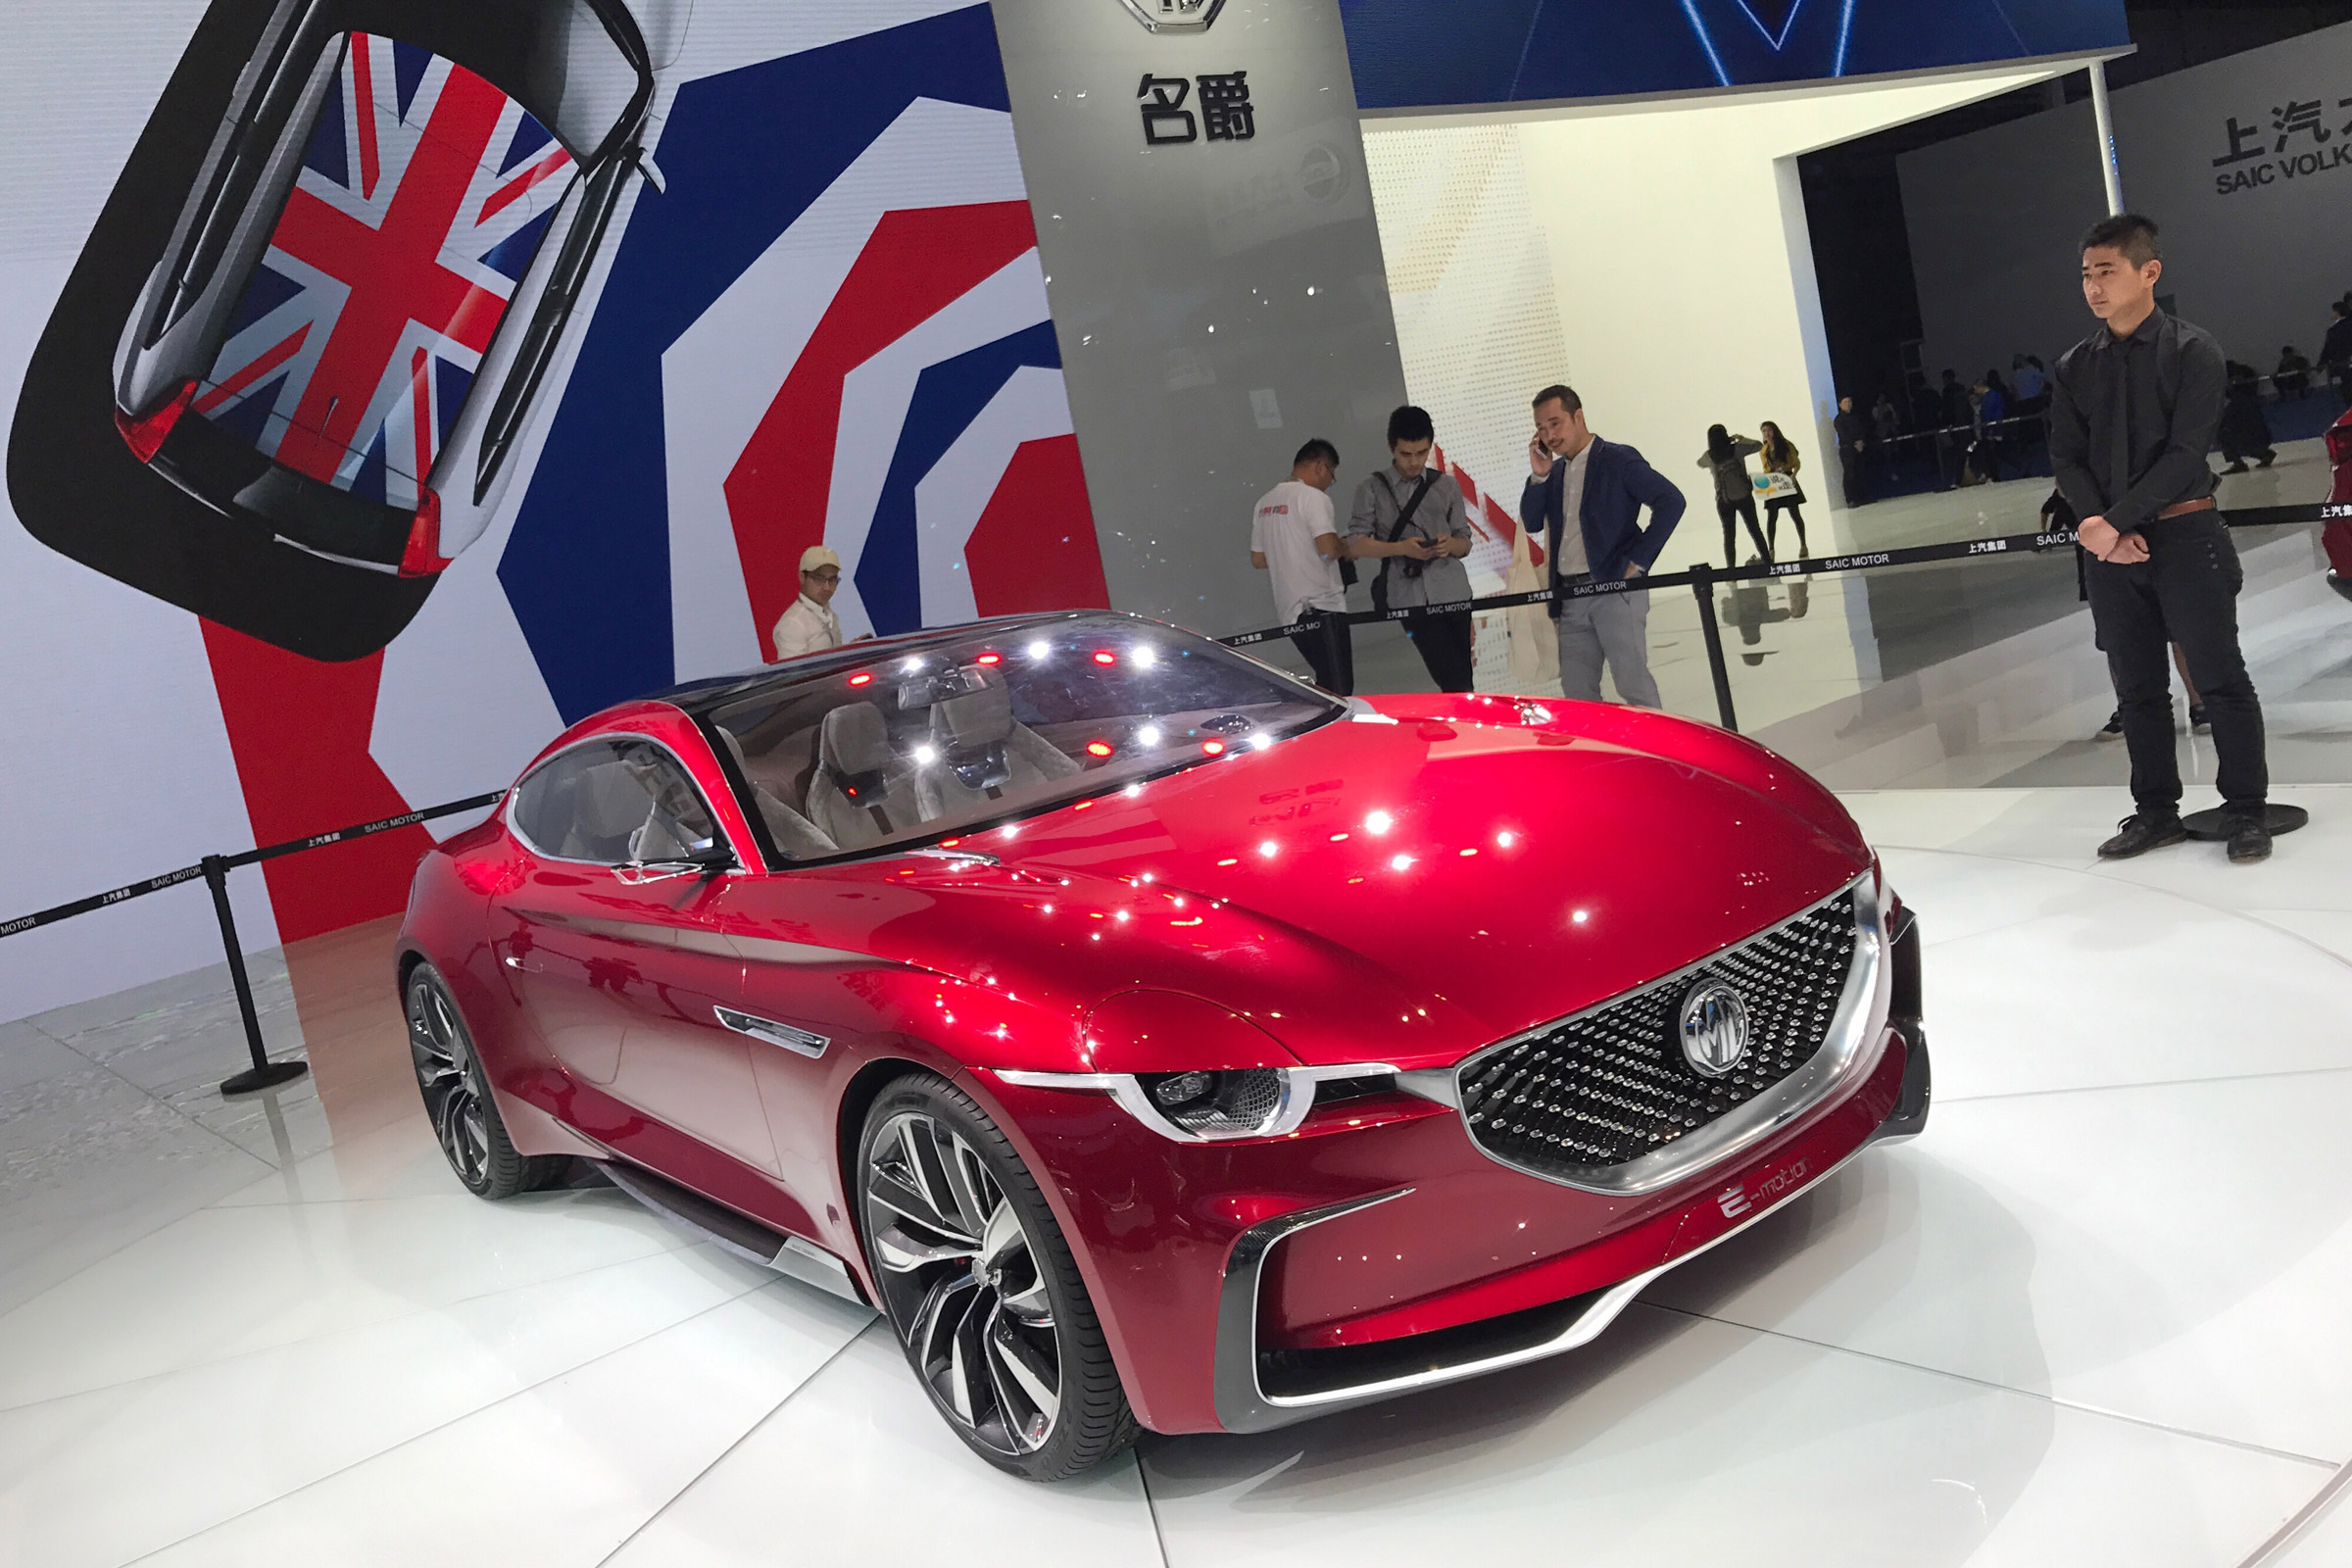 mg introduces e motion concept in shanghai mgs new electric sports car